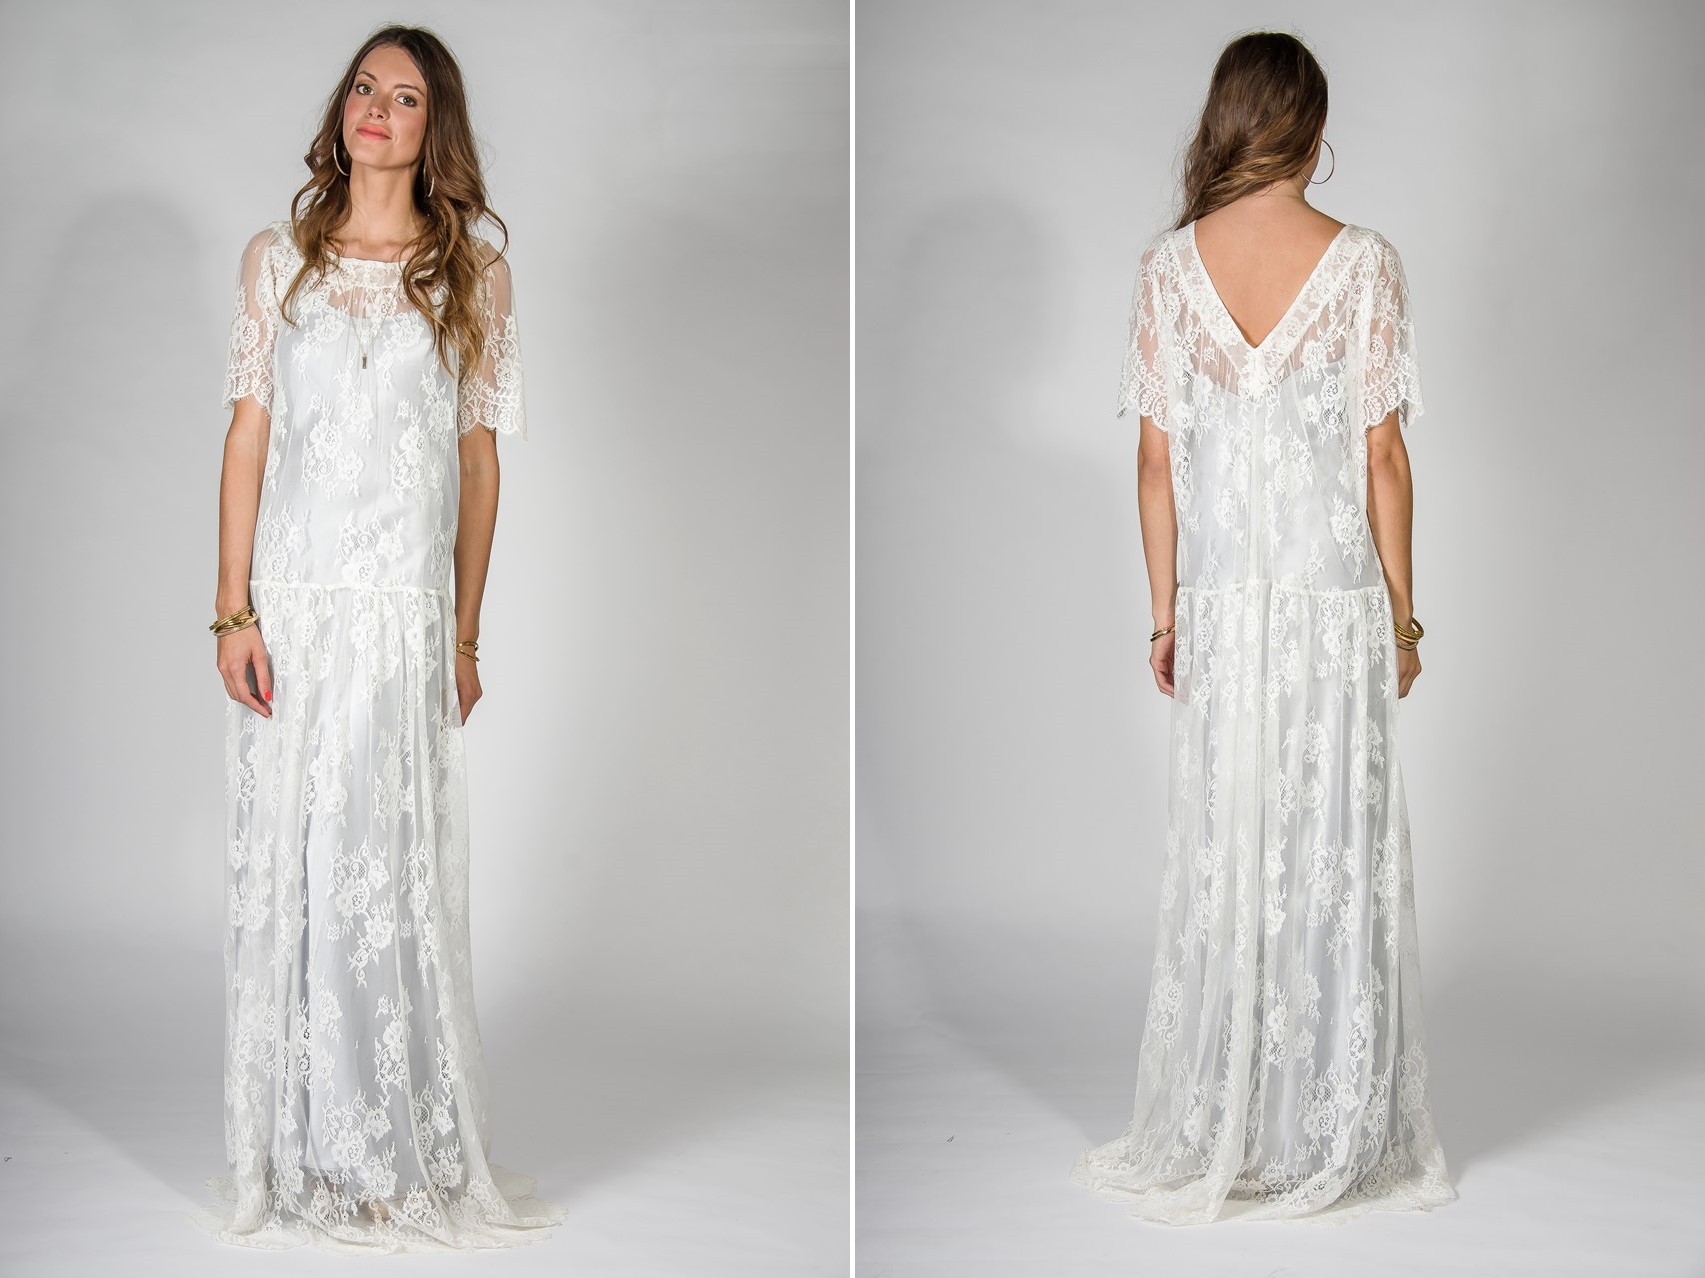 Belle & Bunty's Boho 'A Piece of My Heart' 2016 Bridal Collection